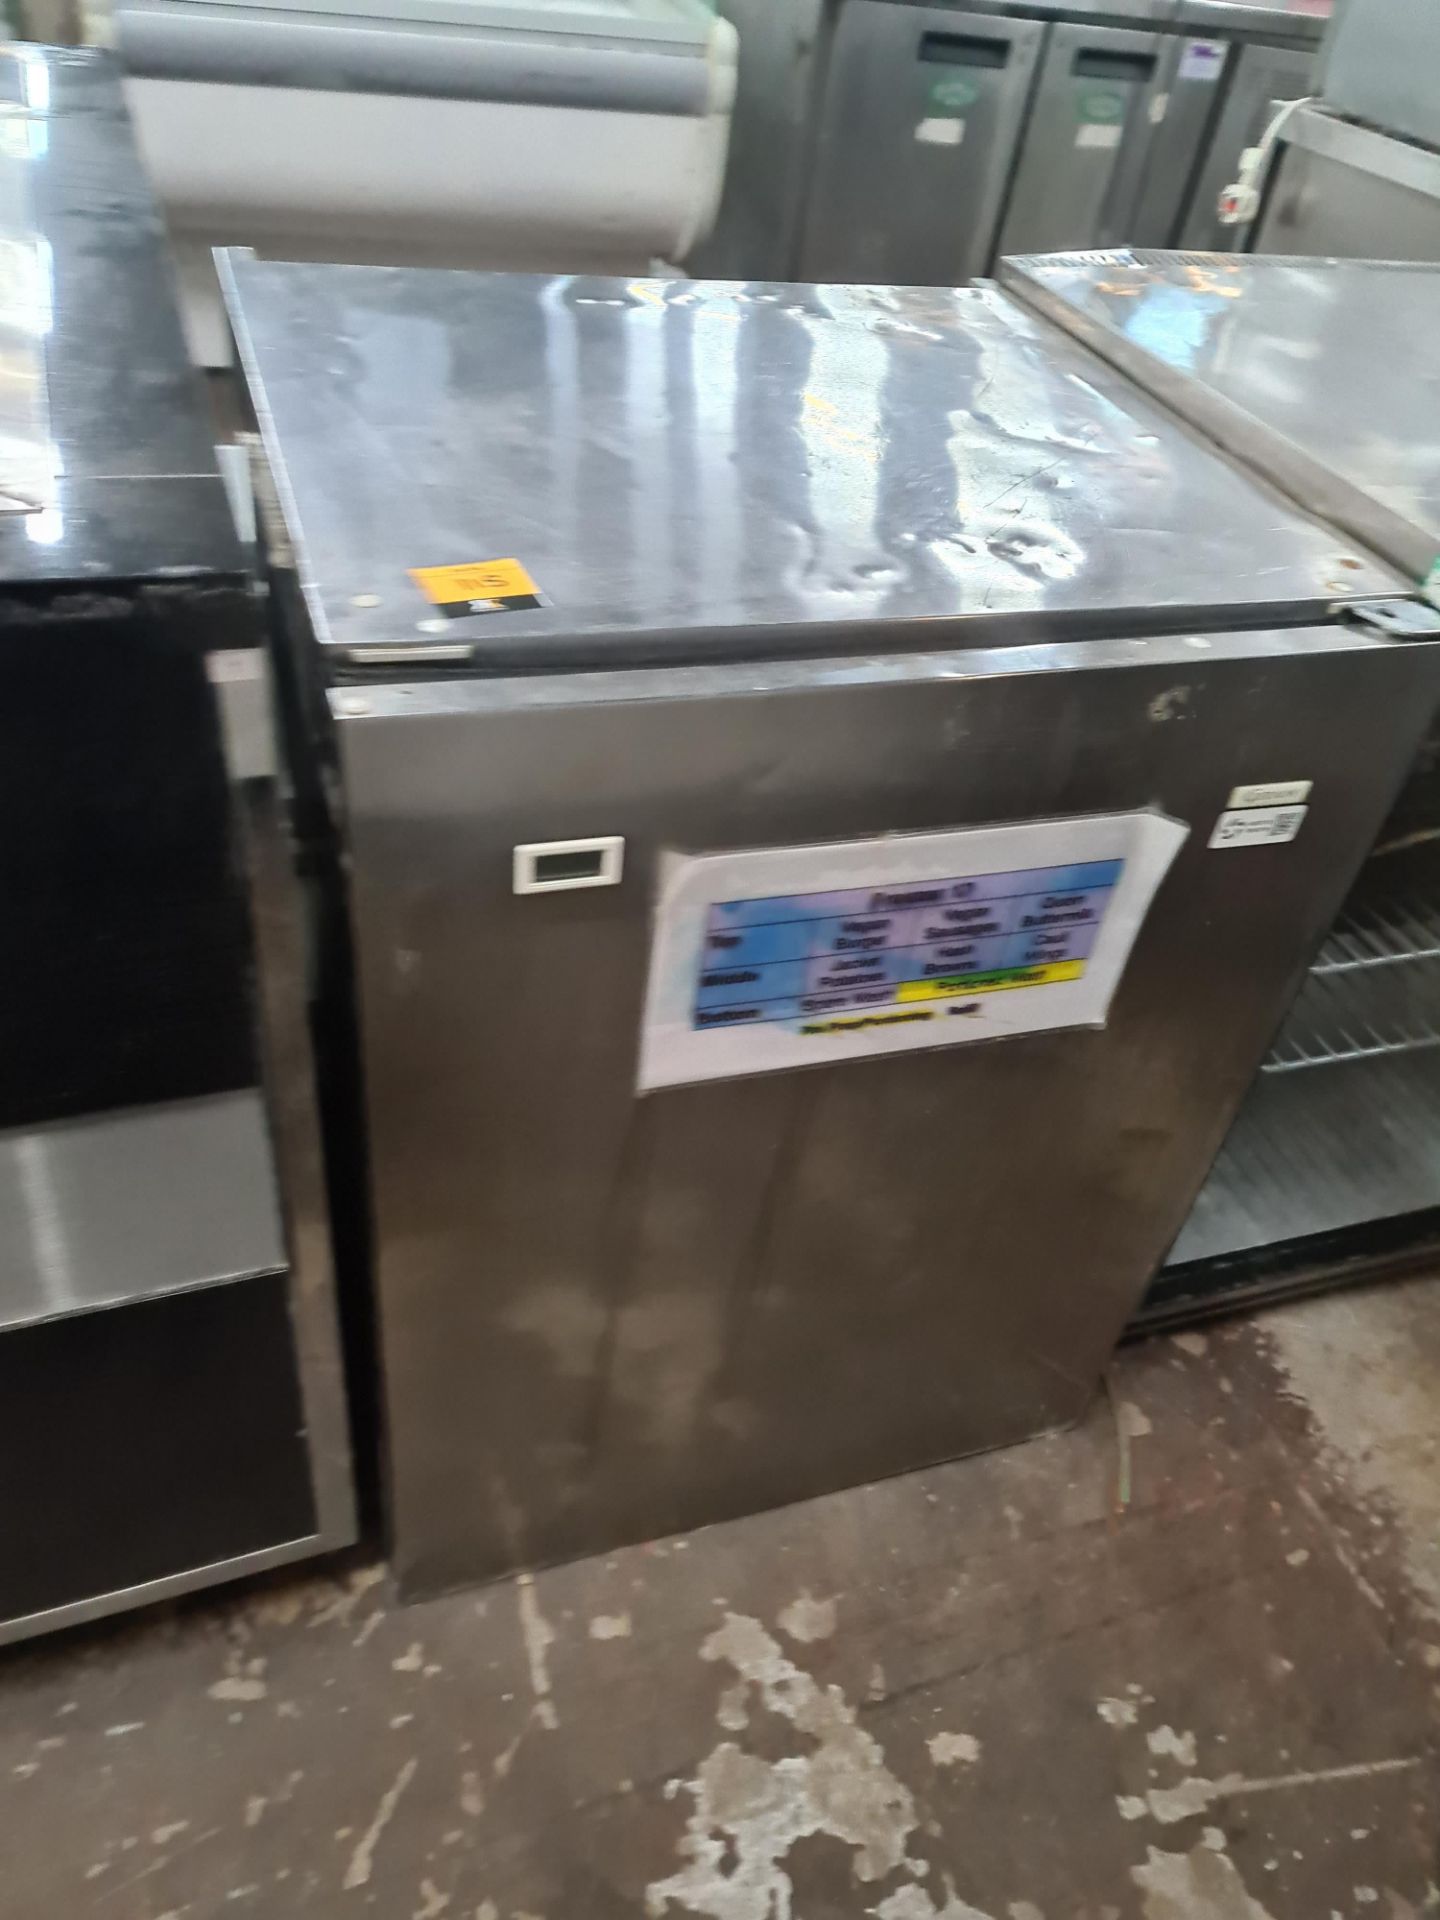 Gram stainless steel under counter freezer, model F150GB - Image 2 of 6